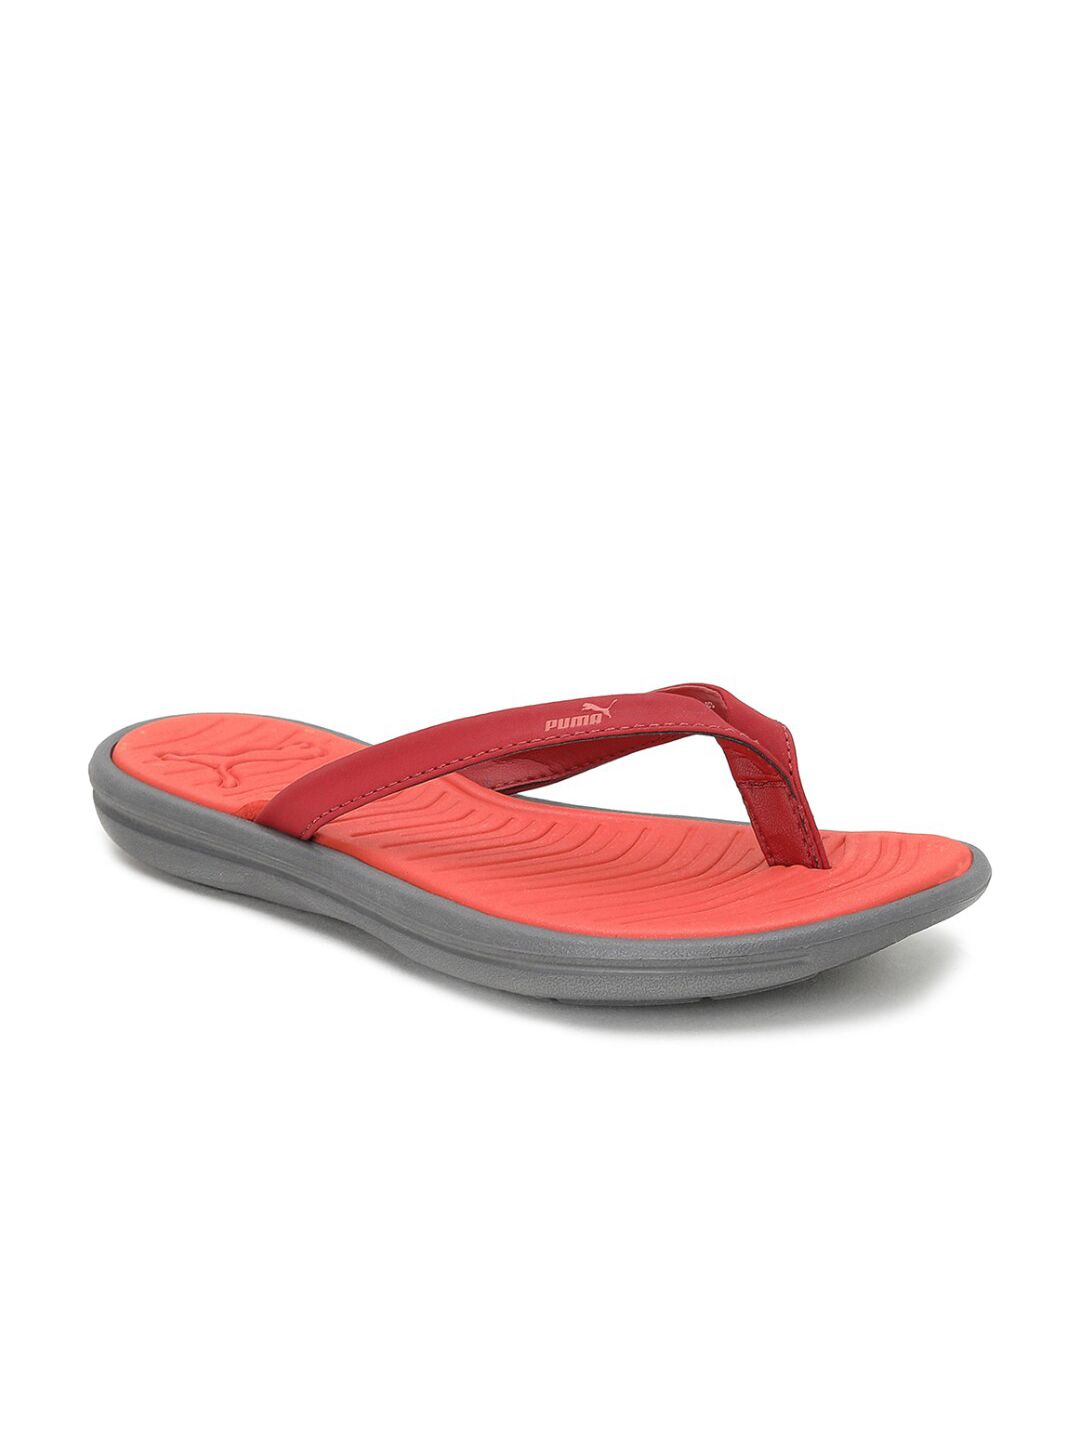 Puma Women Red & Peach-Coloured Daisy Thong Flip-Flops Price in India